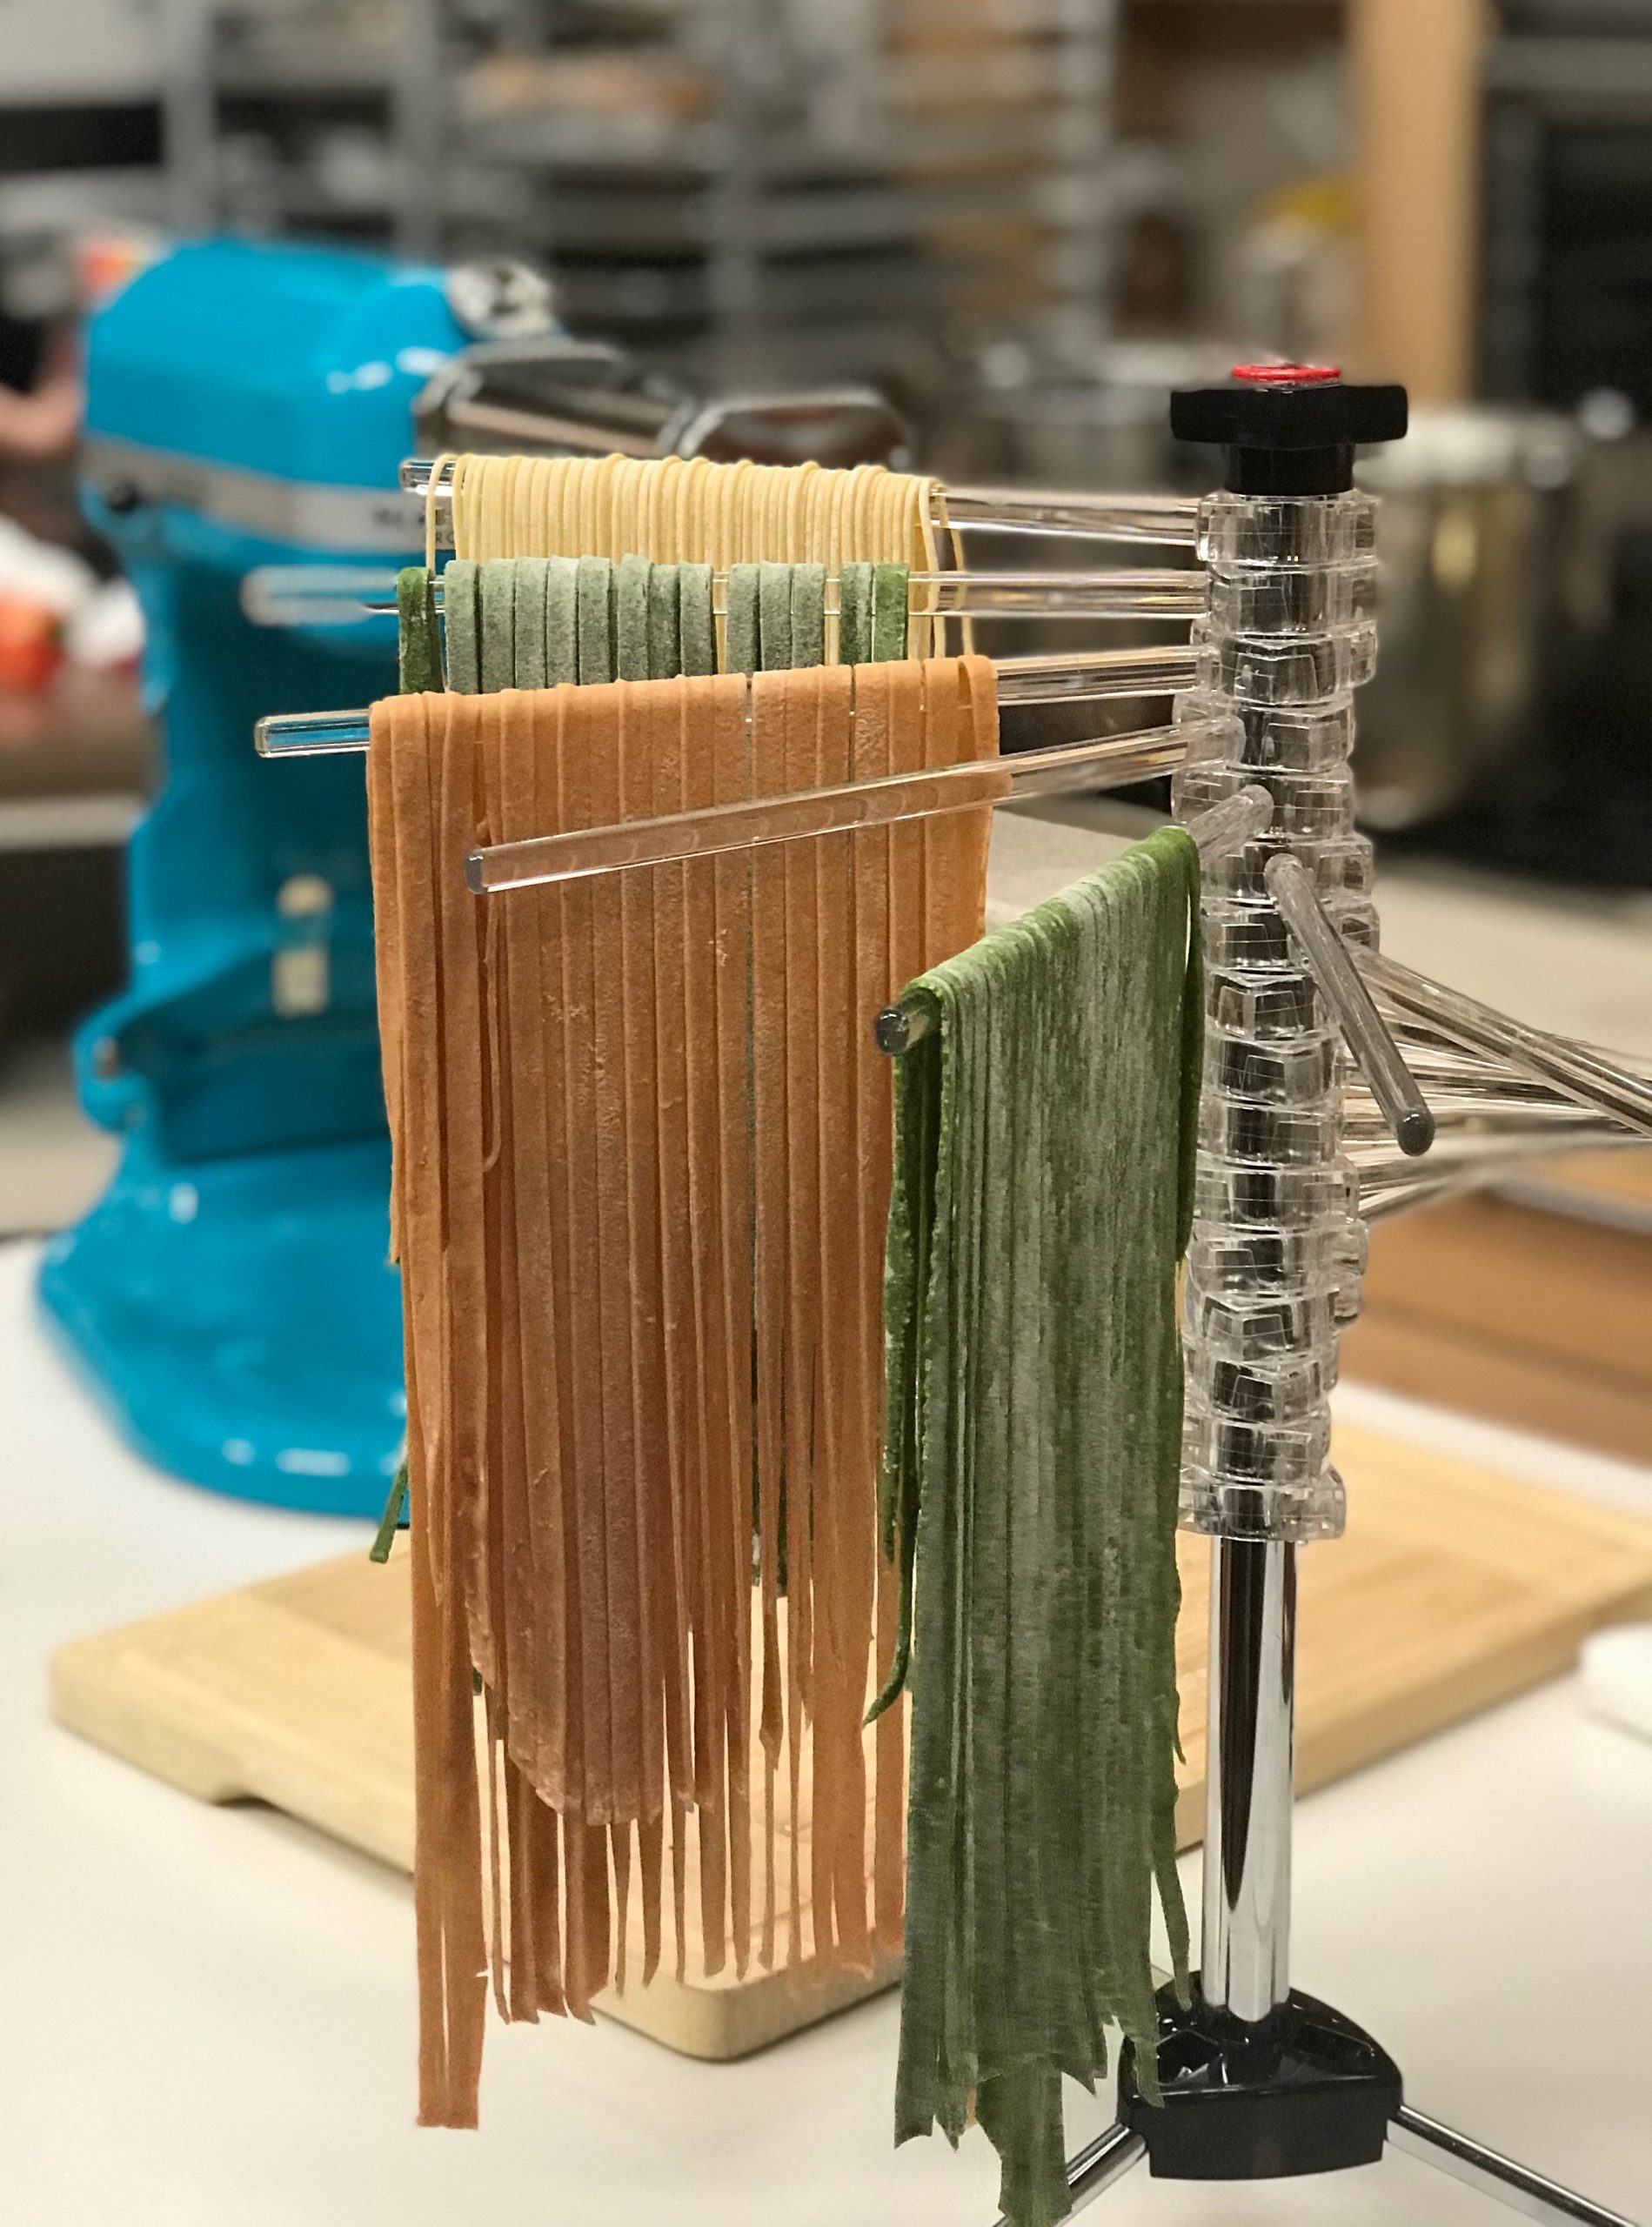 https://www.epicuricloud.com/wp-content/uploads/2019/05/Tomato-and-Spinach-Pasta-Dough-Recipe-scaled.jpg